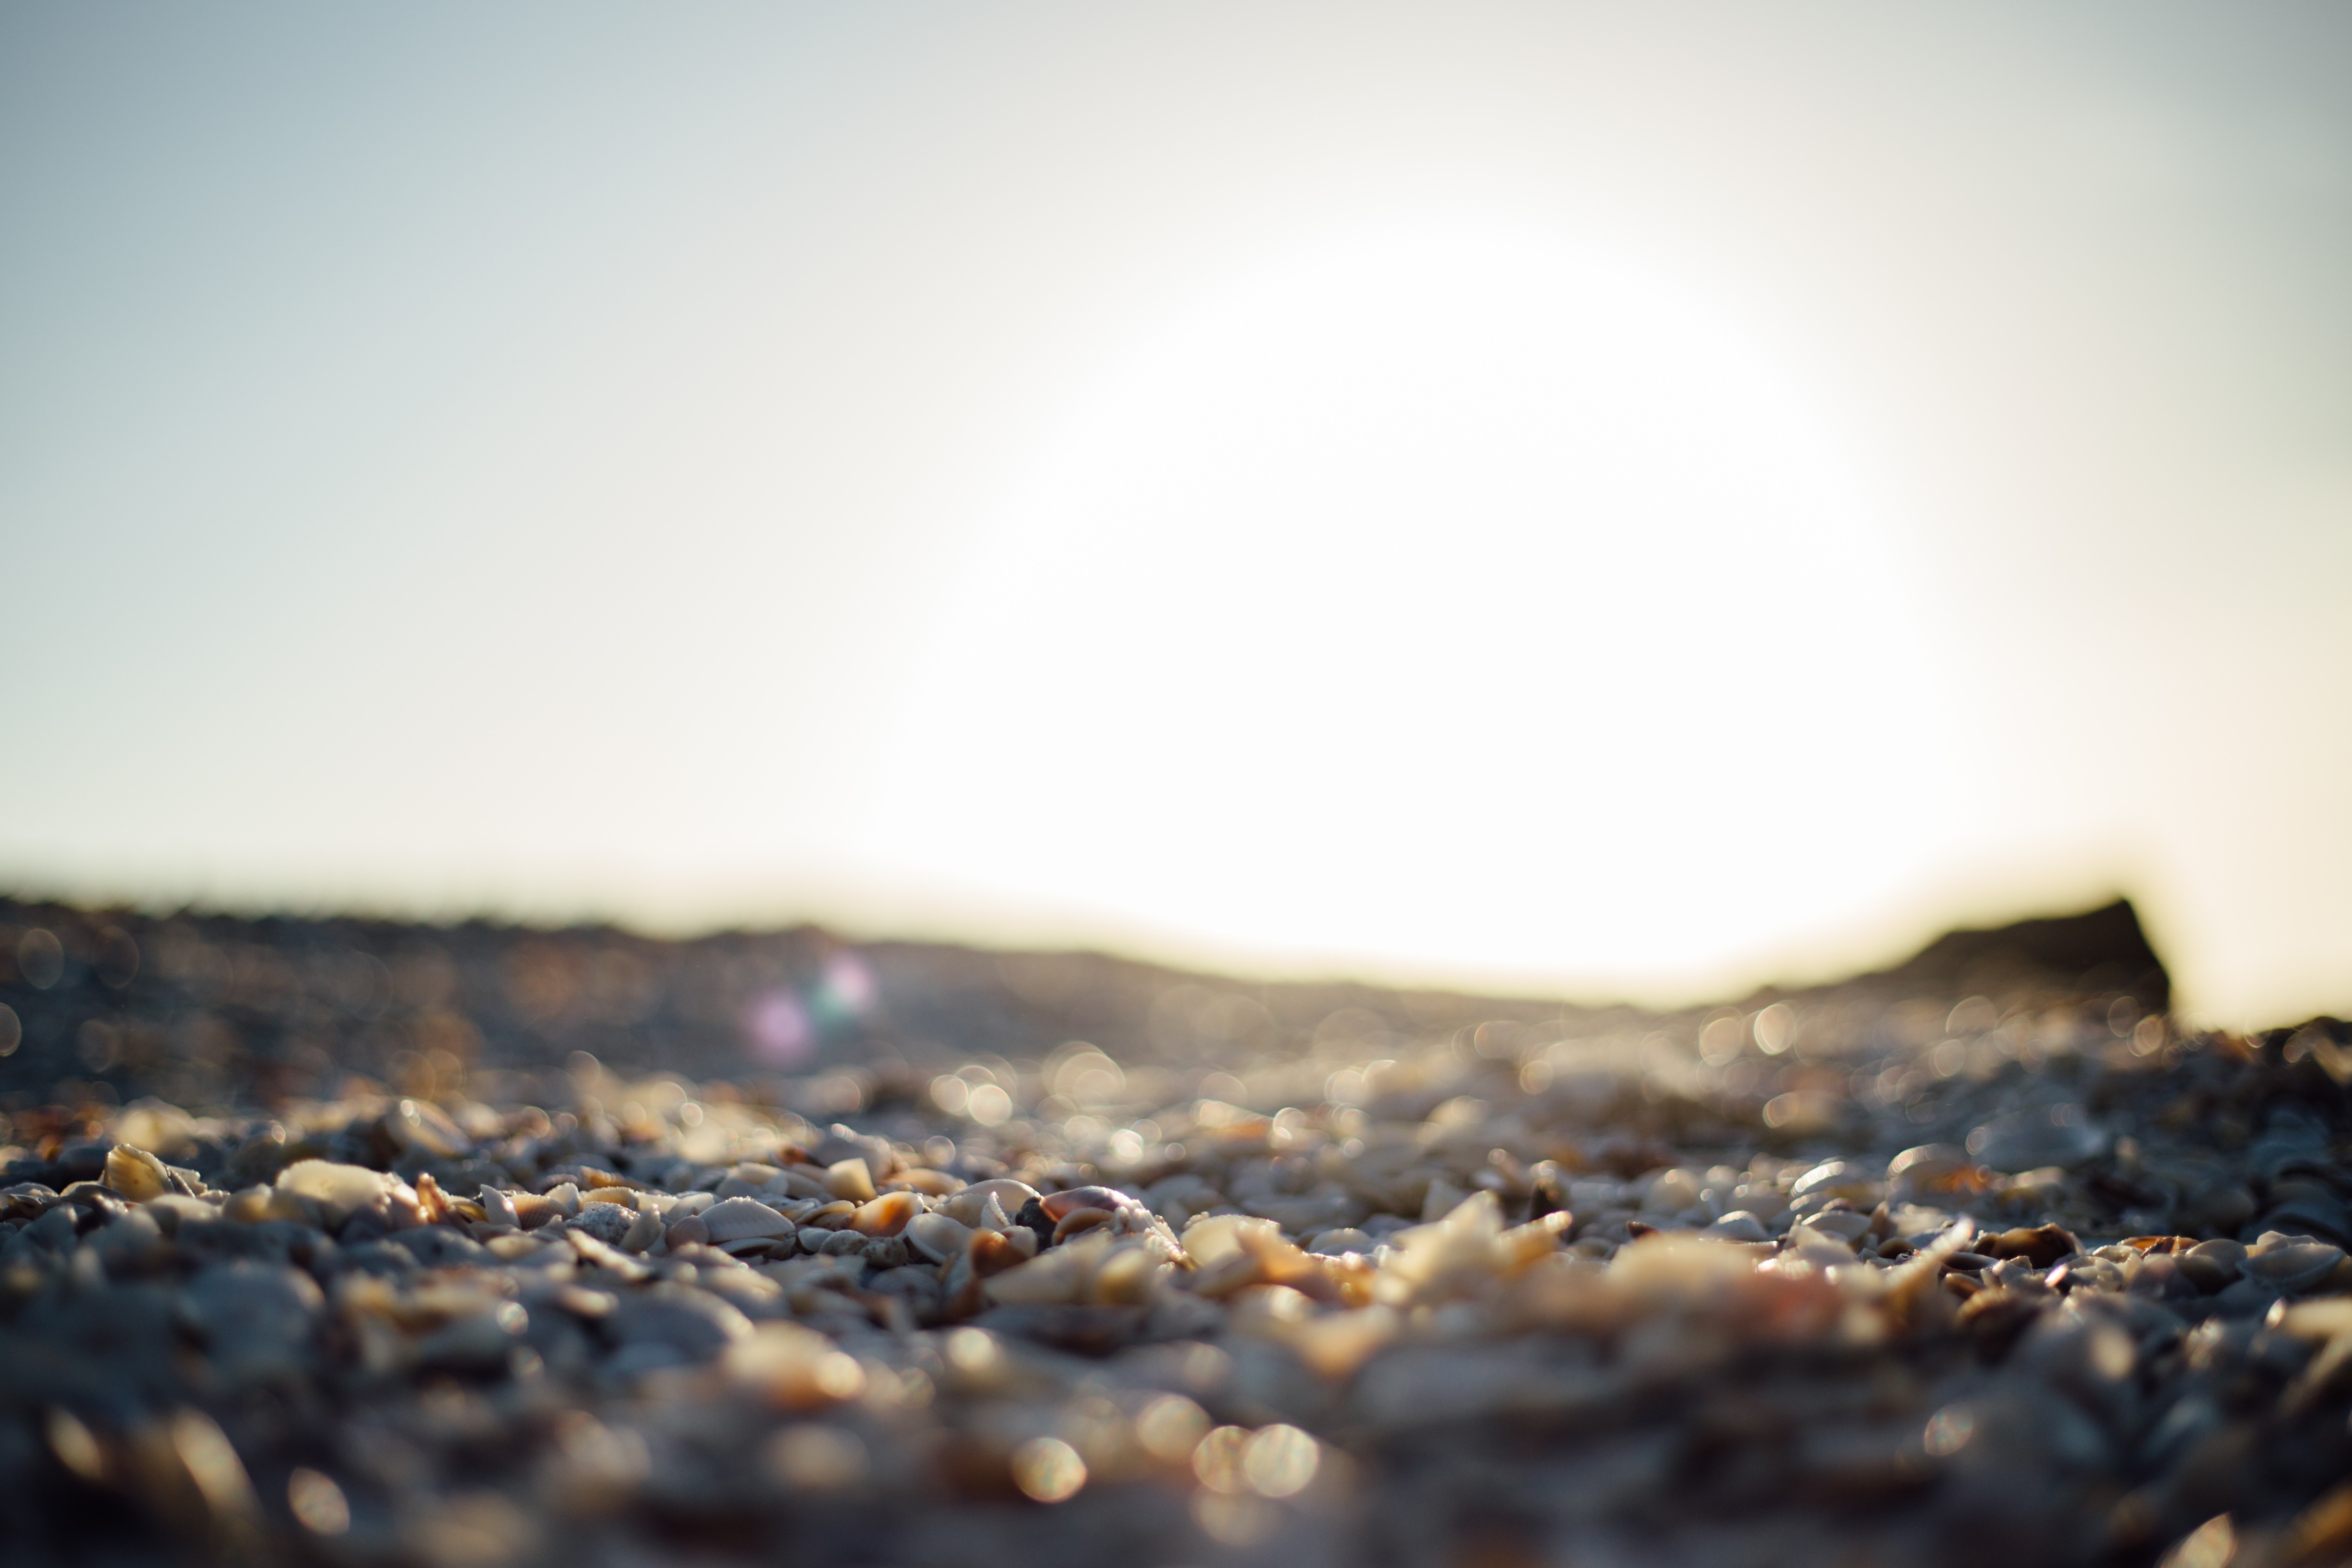 General 5049x3366 pebbles beach sunset nature outdoors worm's eye view